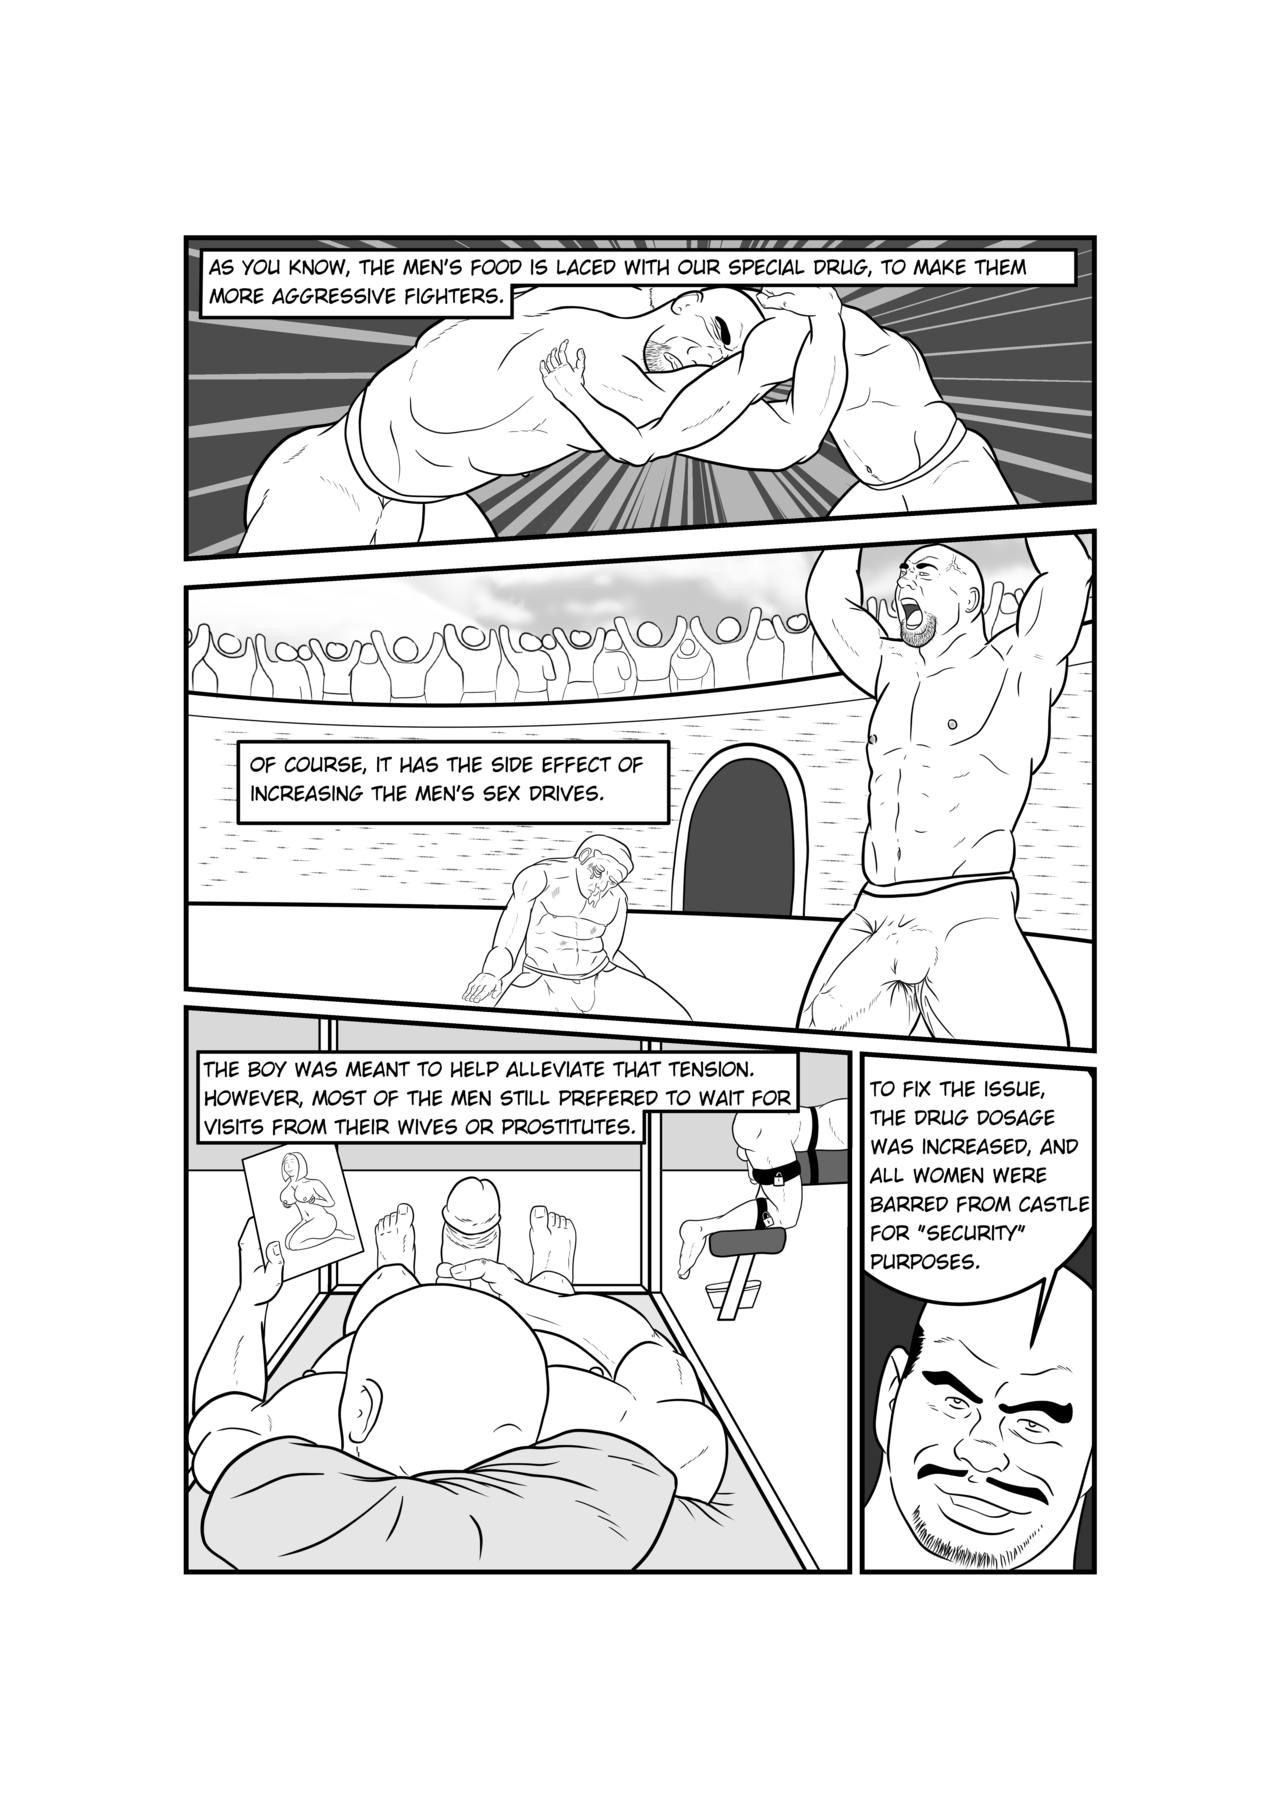 Smoking Father and Son in Hell - Unauthorized Fan Comic - Original Ejaculations - Page 3